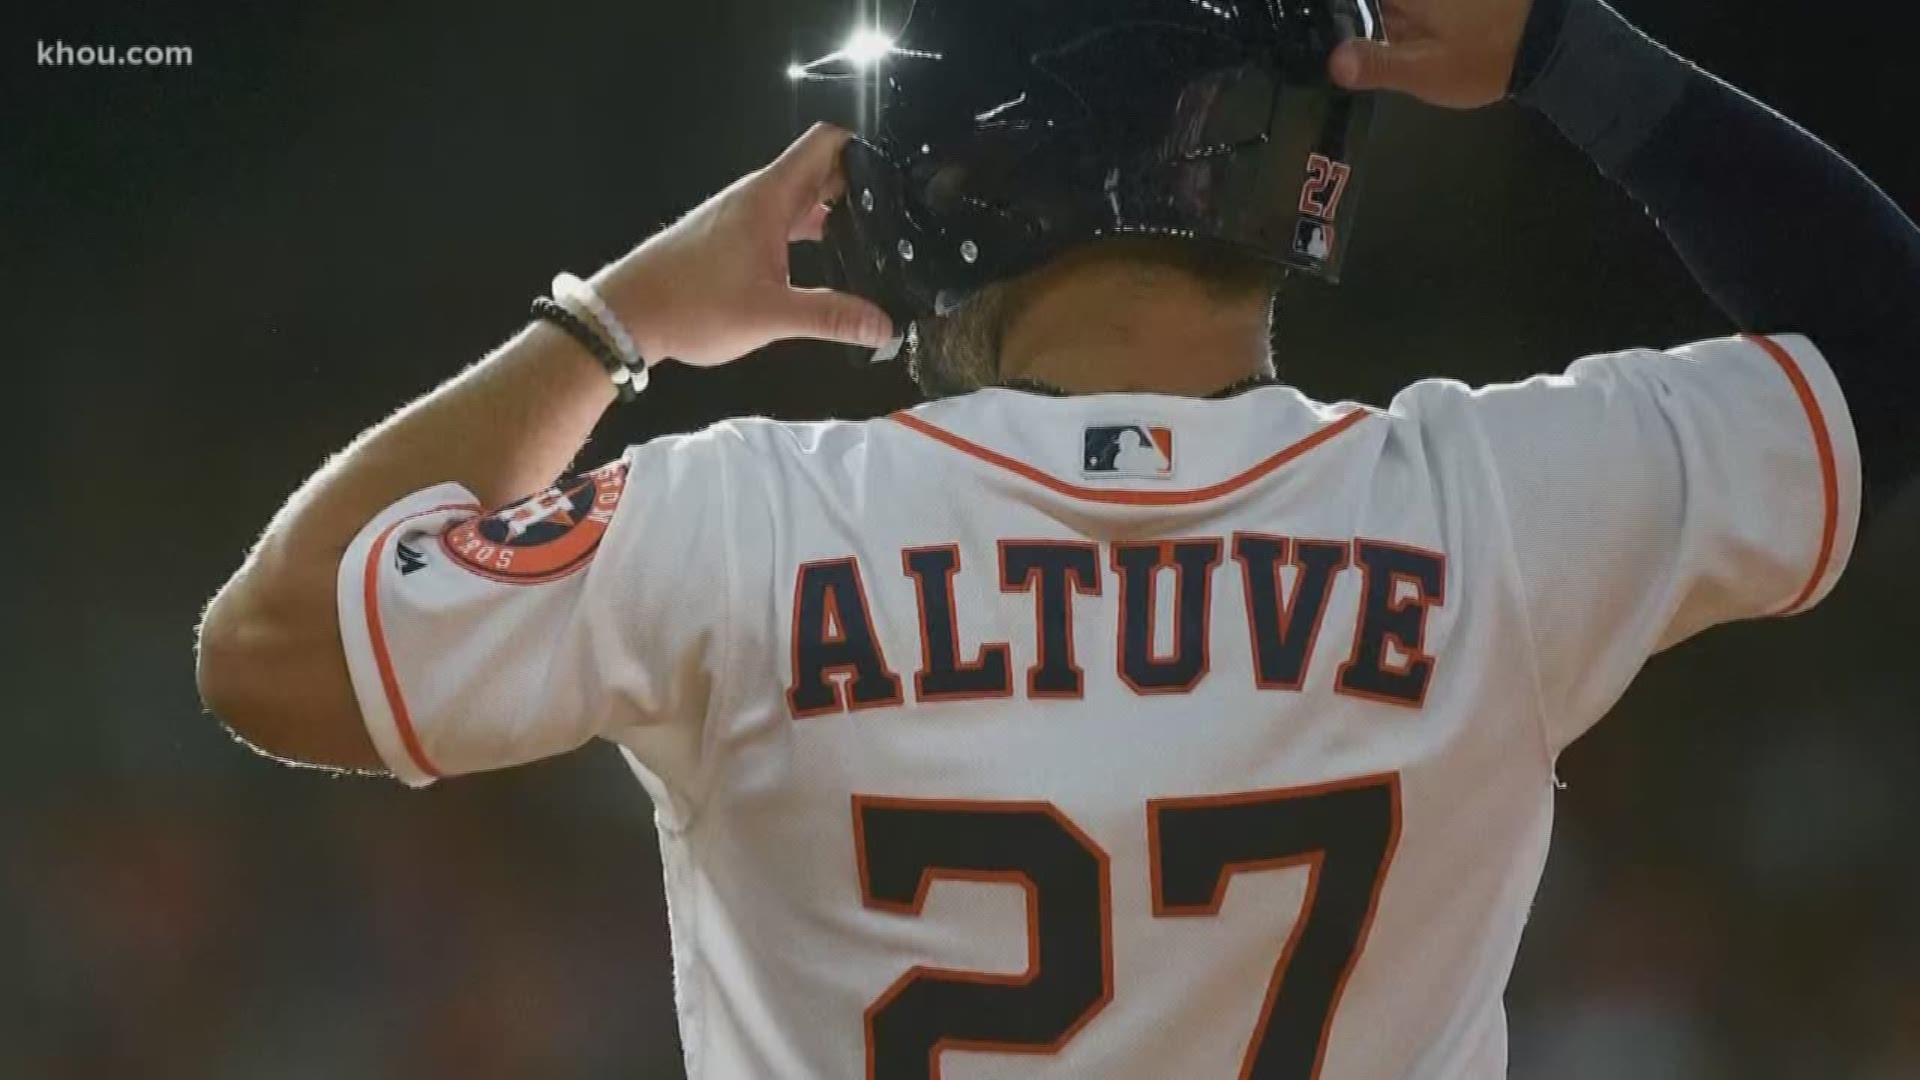 Jose Altuve plays the game the right way, according to his teammate Carlos Correa. Correa defended Altuve as the team tries to move on from the sign-stealing scandal